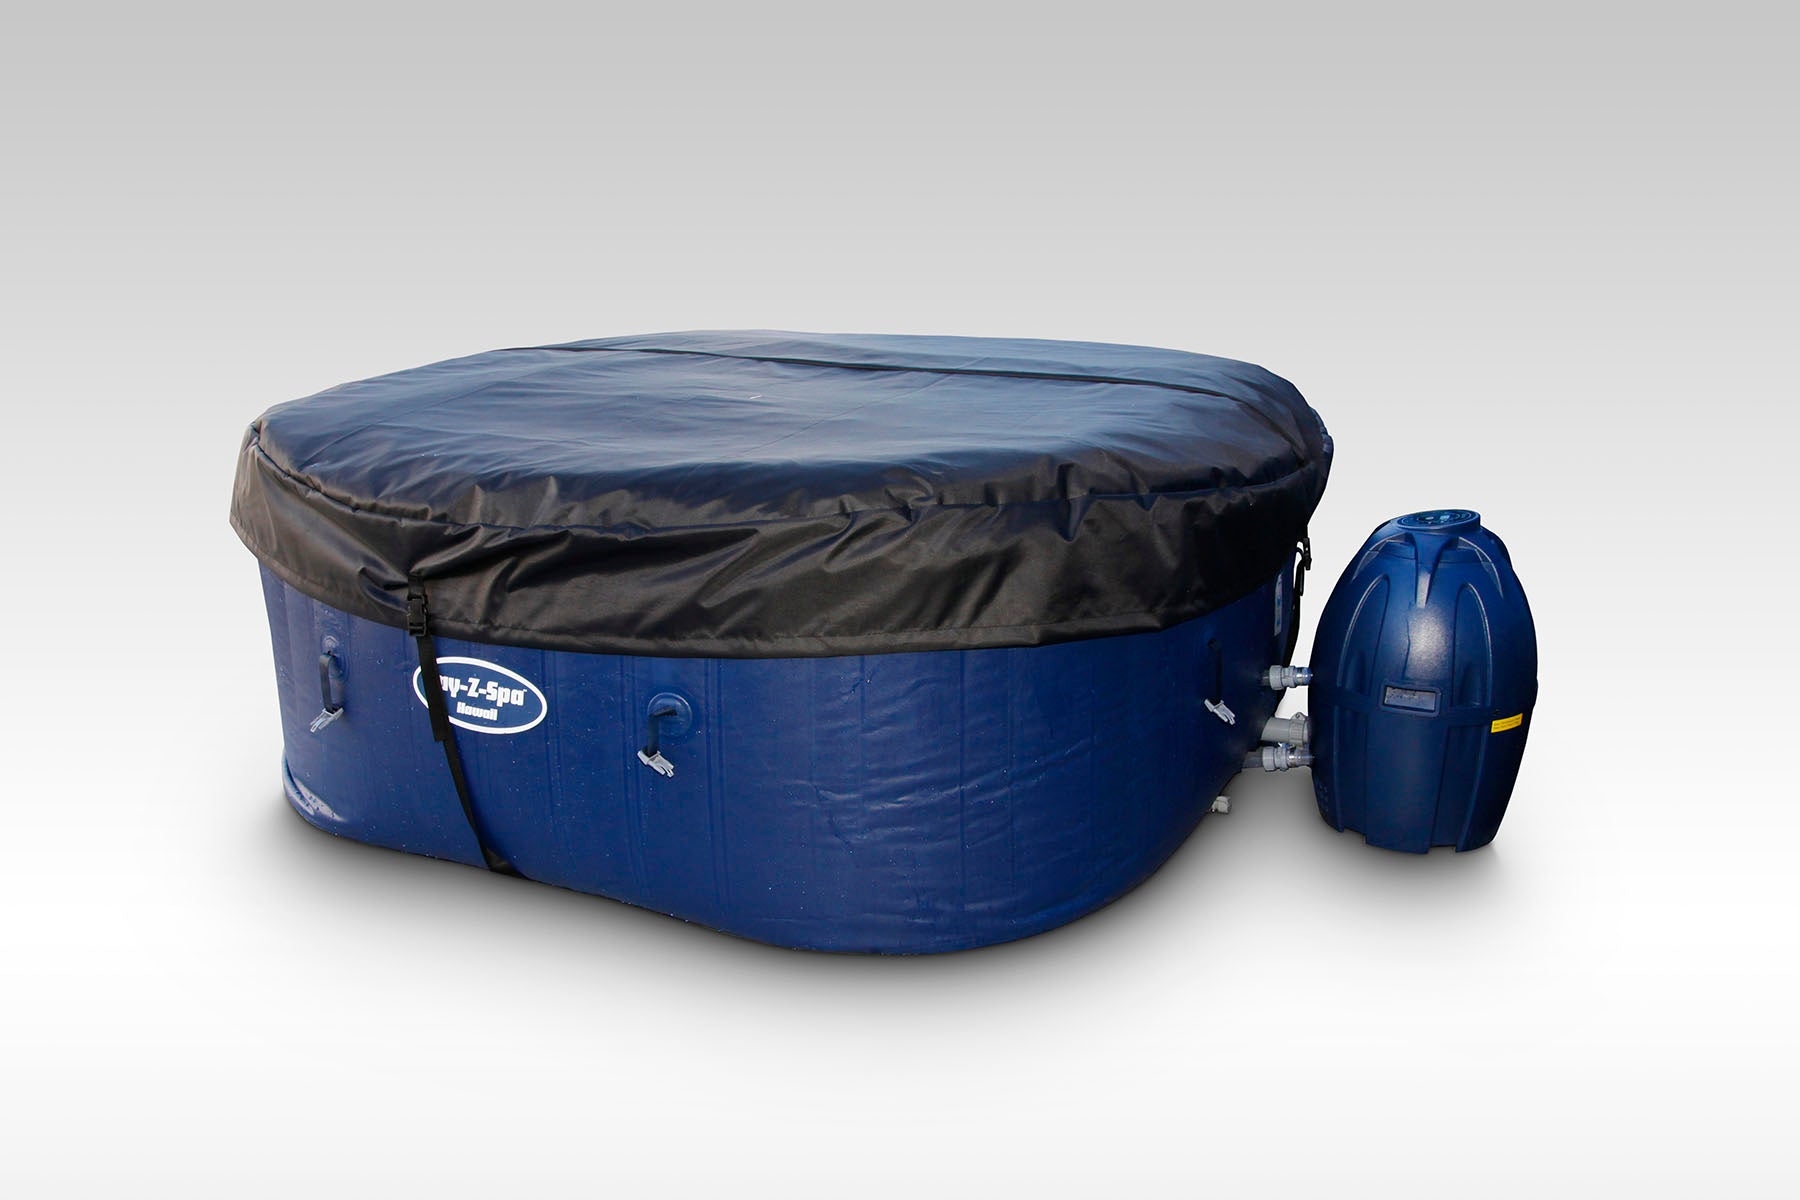 Insulated Lids / Cover for Inflatable Hot Tubs – Protective & Improves Energy Efficiency – Cwtchy Covers